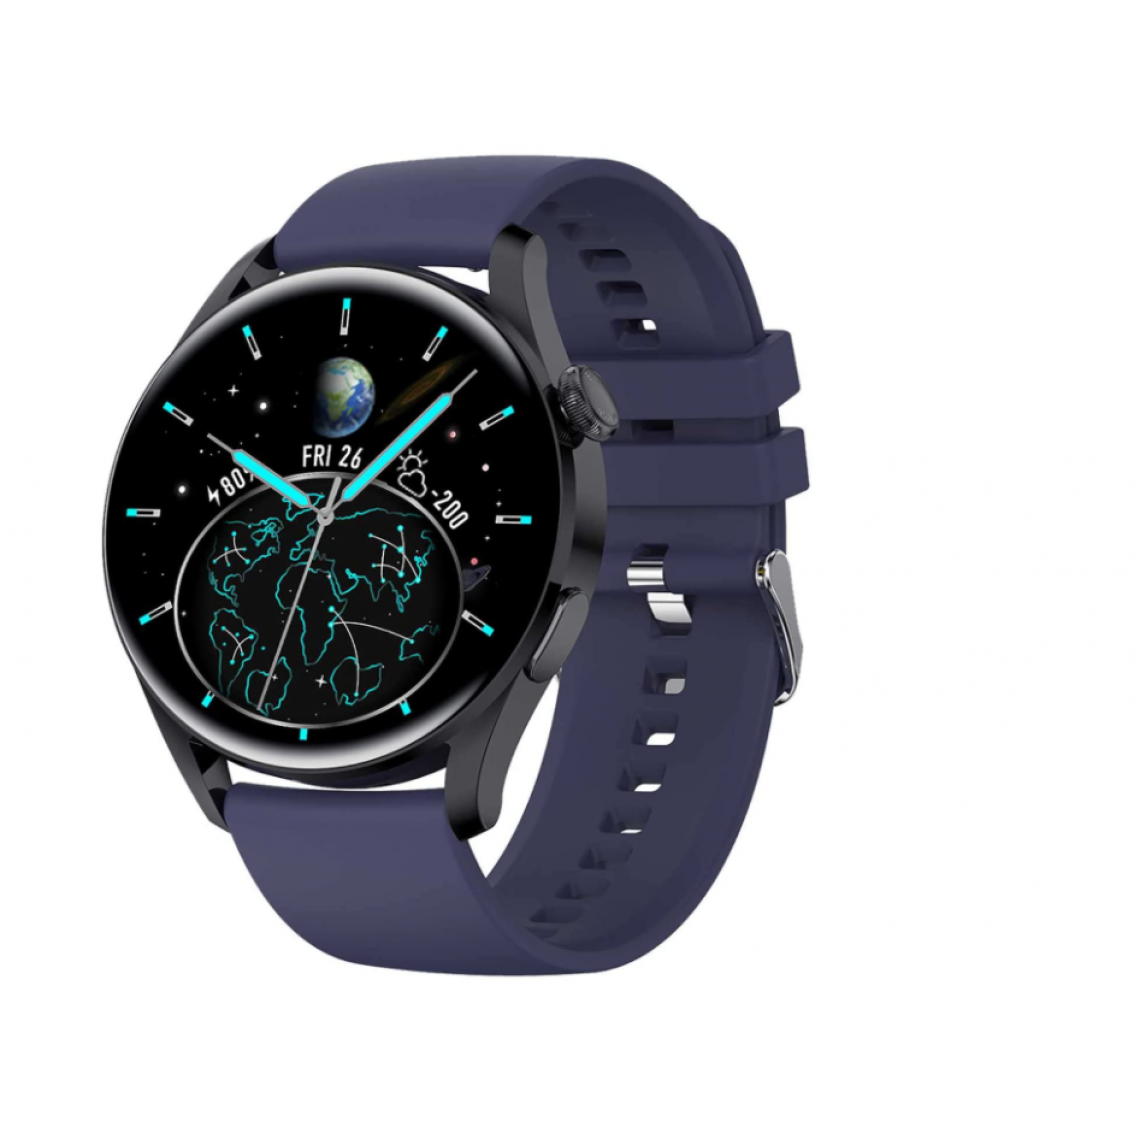 Chronotech Montres - Chronus Smart Watch with Call Function, Fitness Activity Tracker with Information Reminder, Heart Rate, Sleep Monitoring, IP67 Waterproof Smart Watch (Blue) - Montre connectée